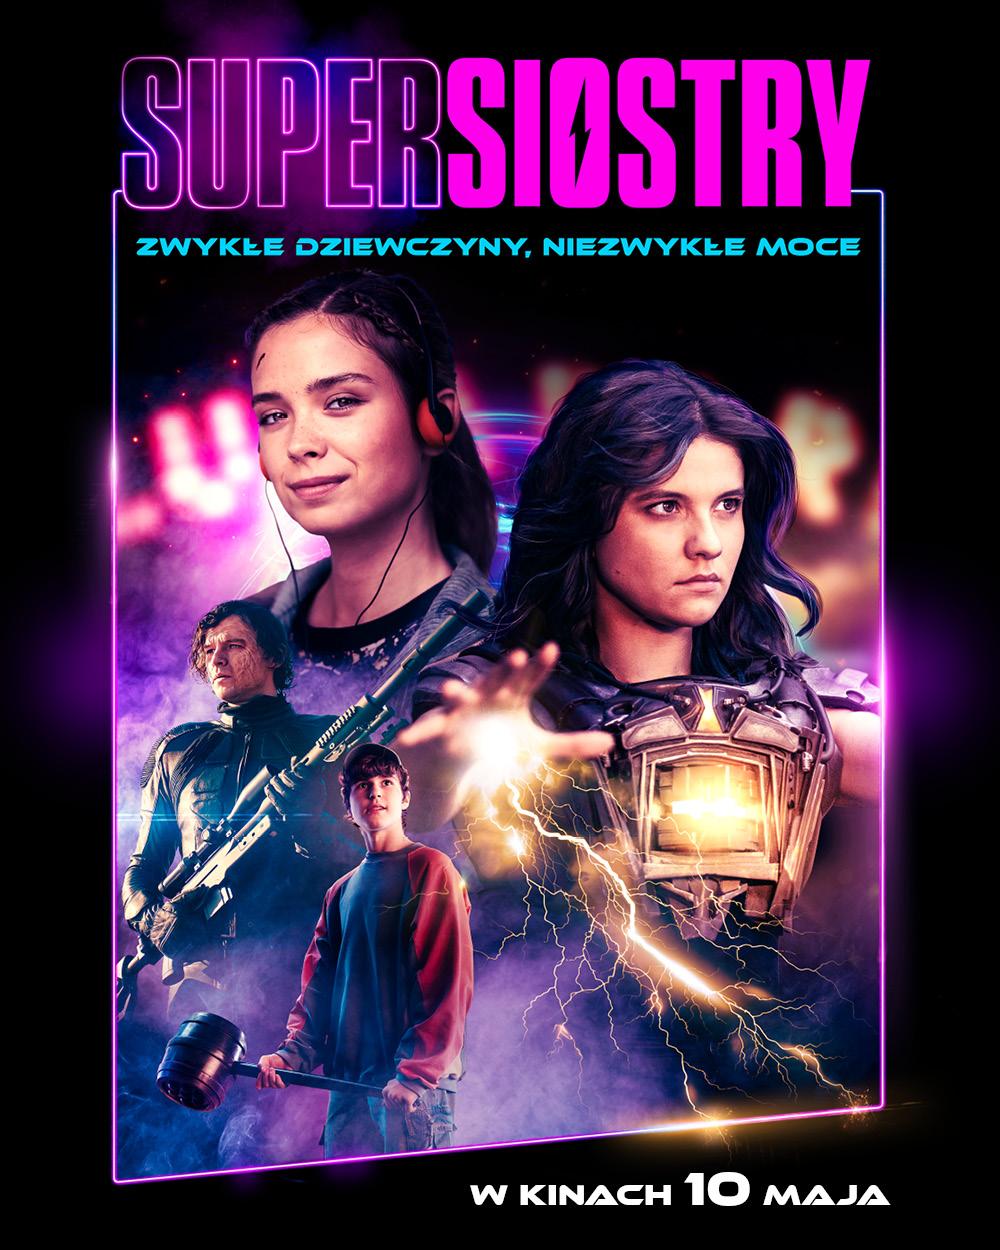 Supersiostry